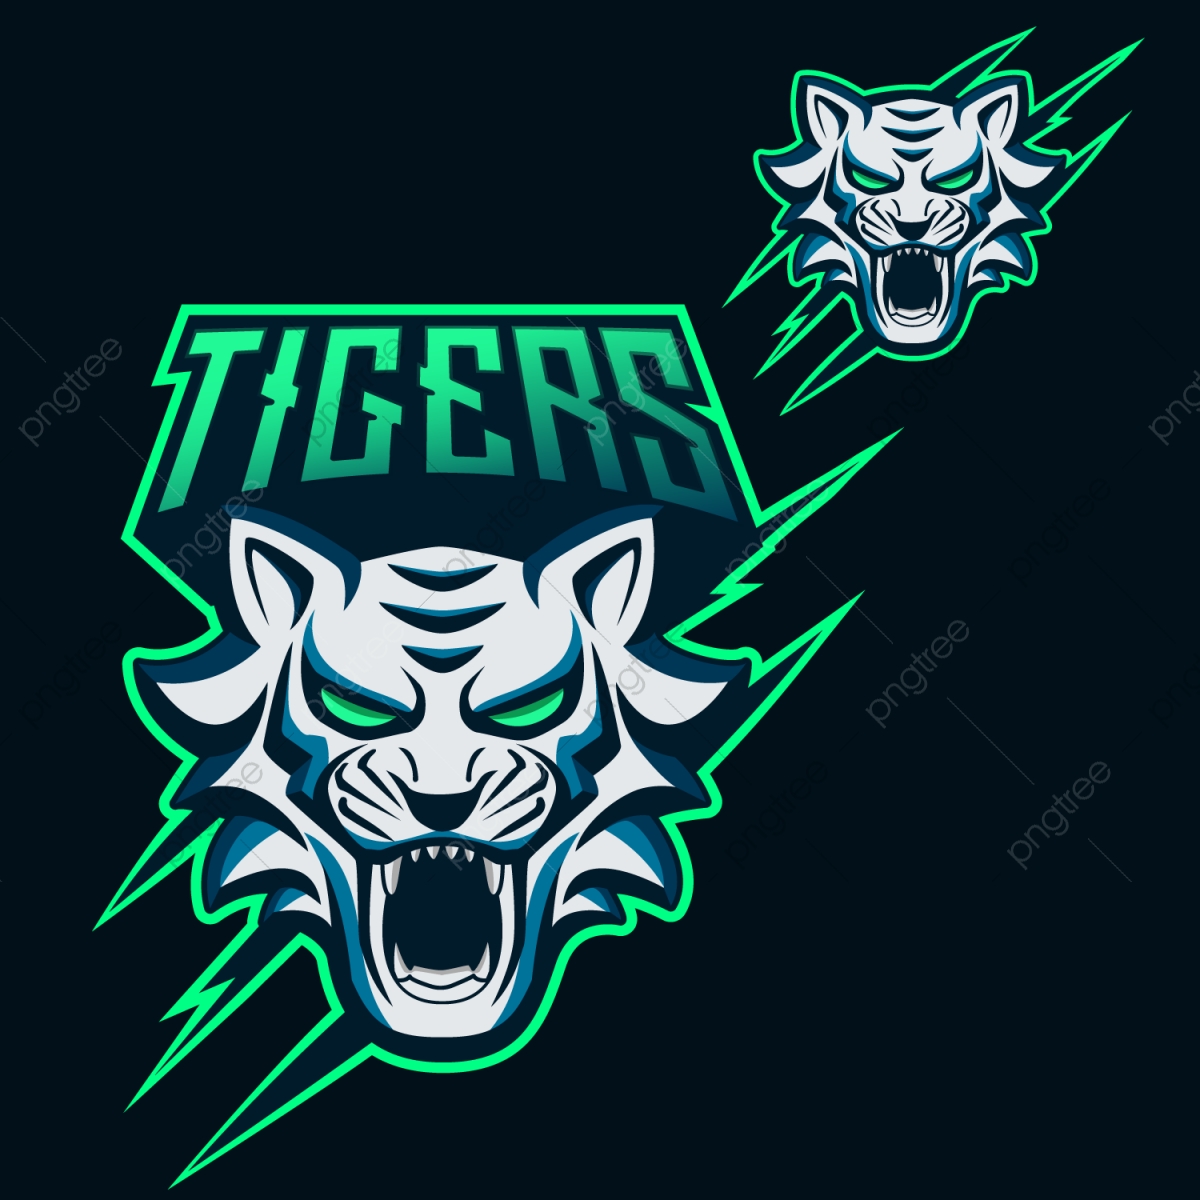 Tigers Esports Logo For Mascotand Twitch, Mascot, Logo, Team PNG and.